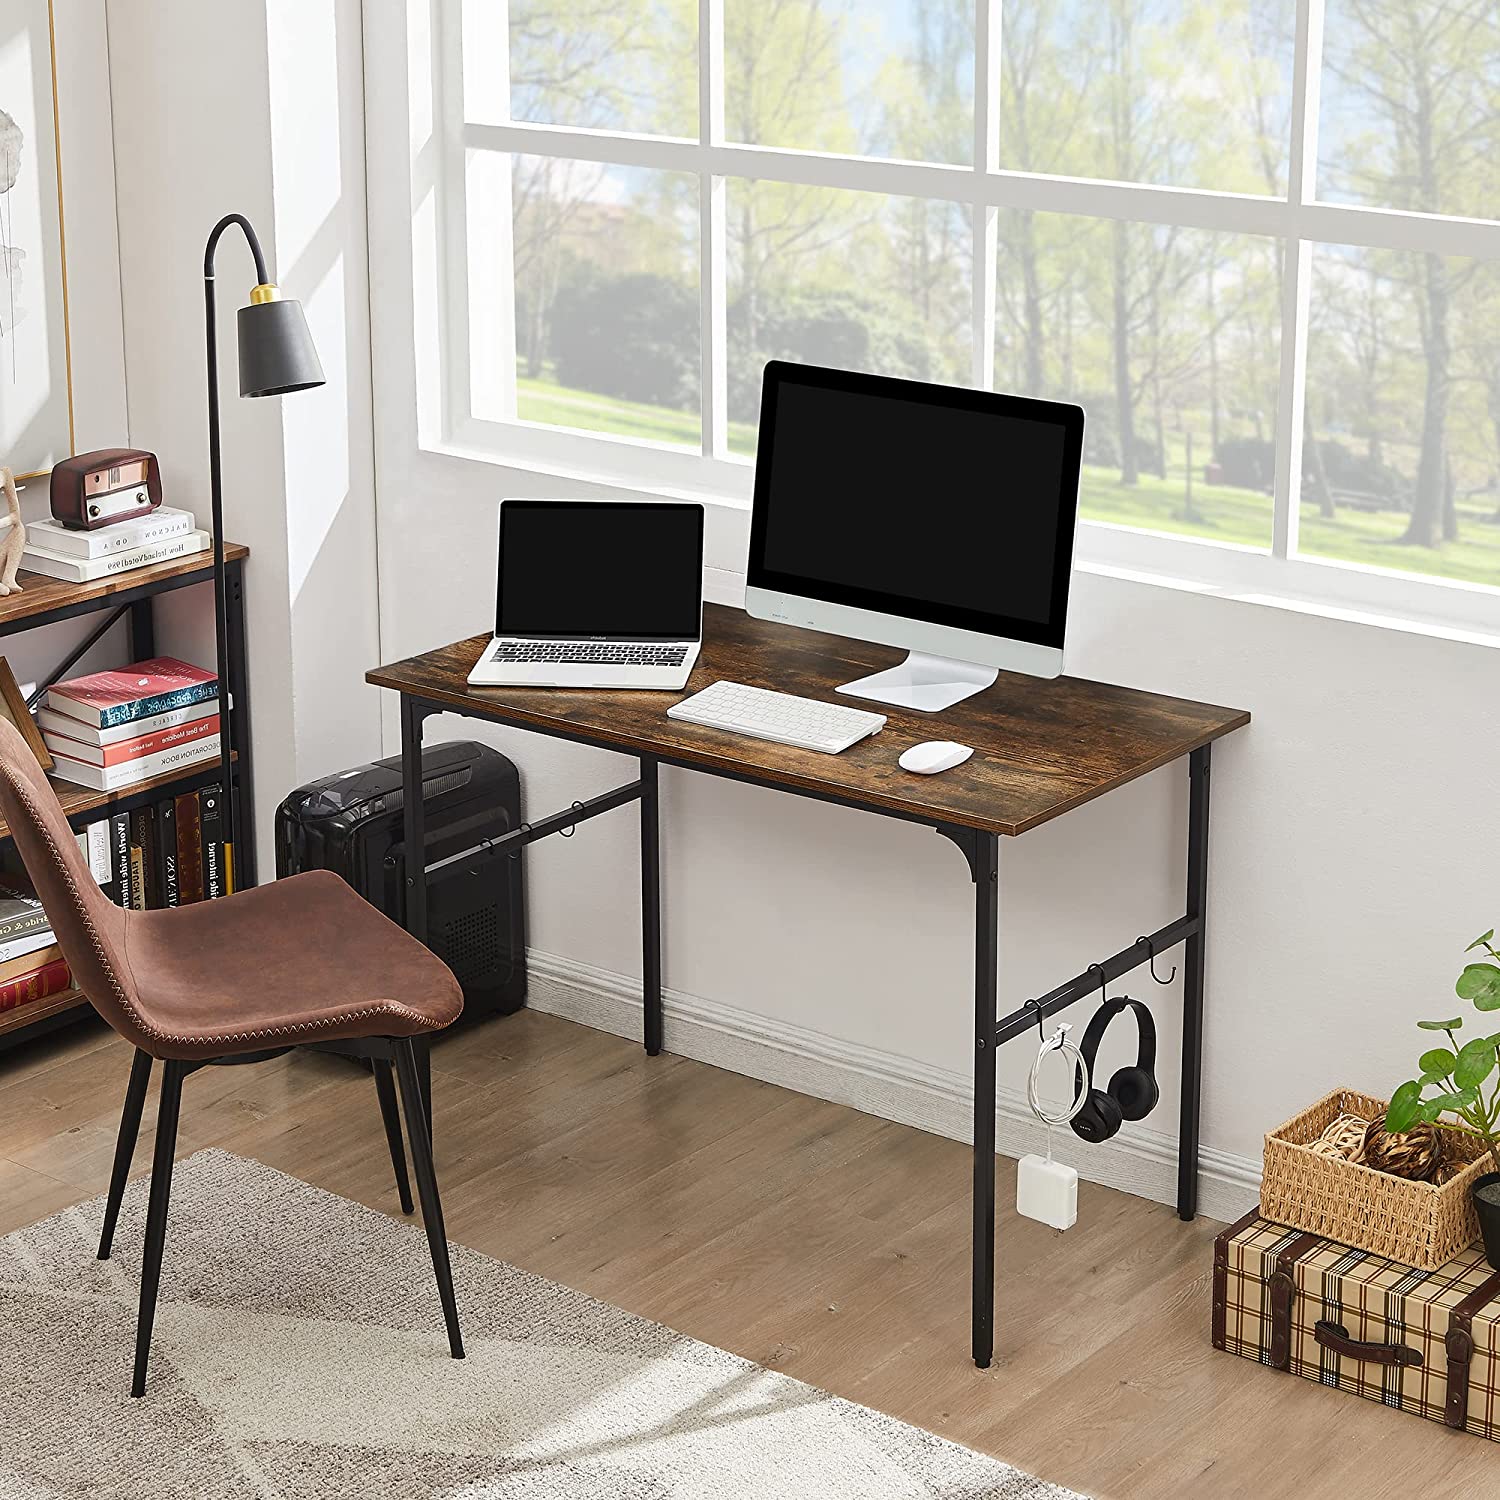 VECELO Computer Writing Desk, Study Table Workstation for Small Spaces with 6 Hooks & Adjustable Legs for Home Office